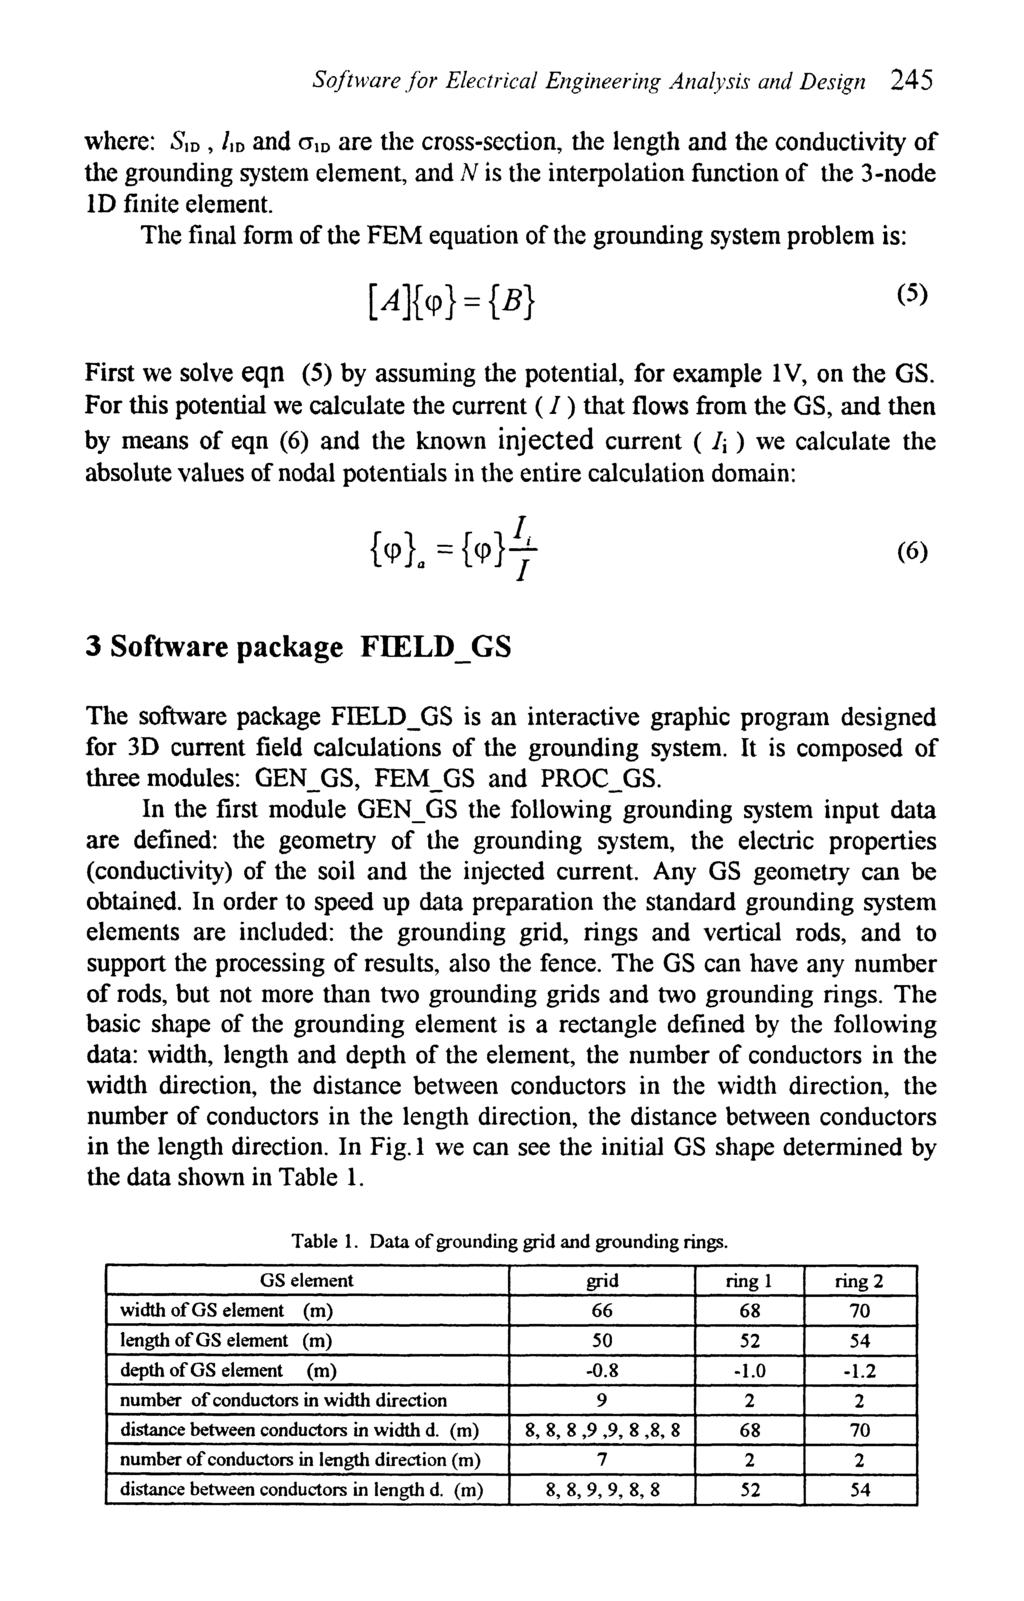 Software for Electrical Engineering Analysis and Design 245 where: SID, /ID and a^ are the cross-section, the length and the conductivity of the grounding system element, and N is the interpolation